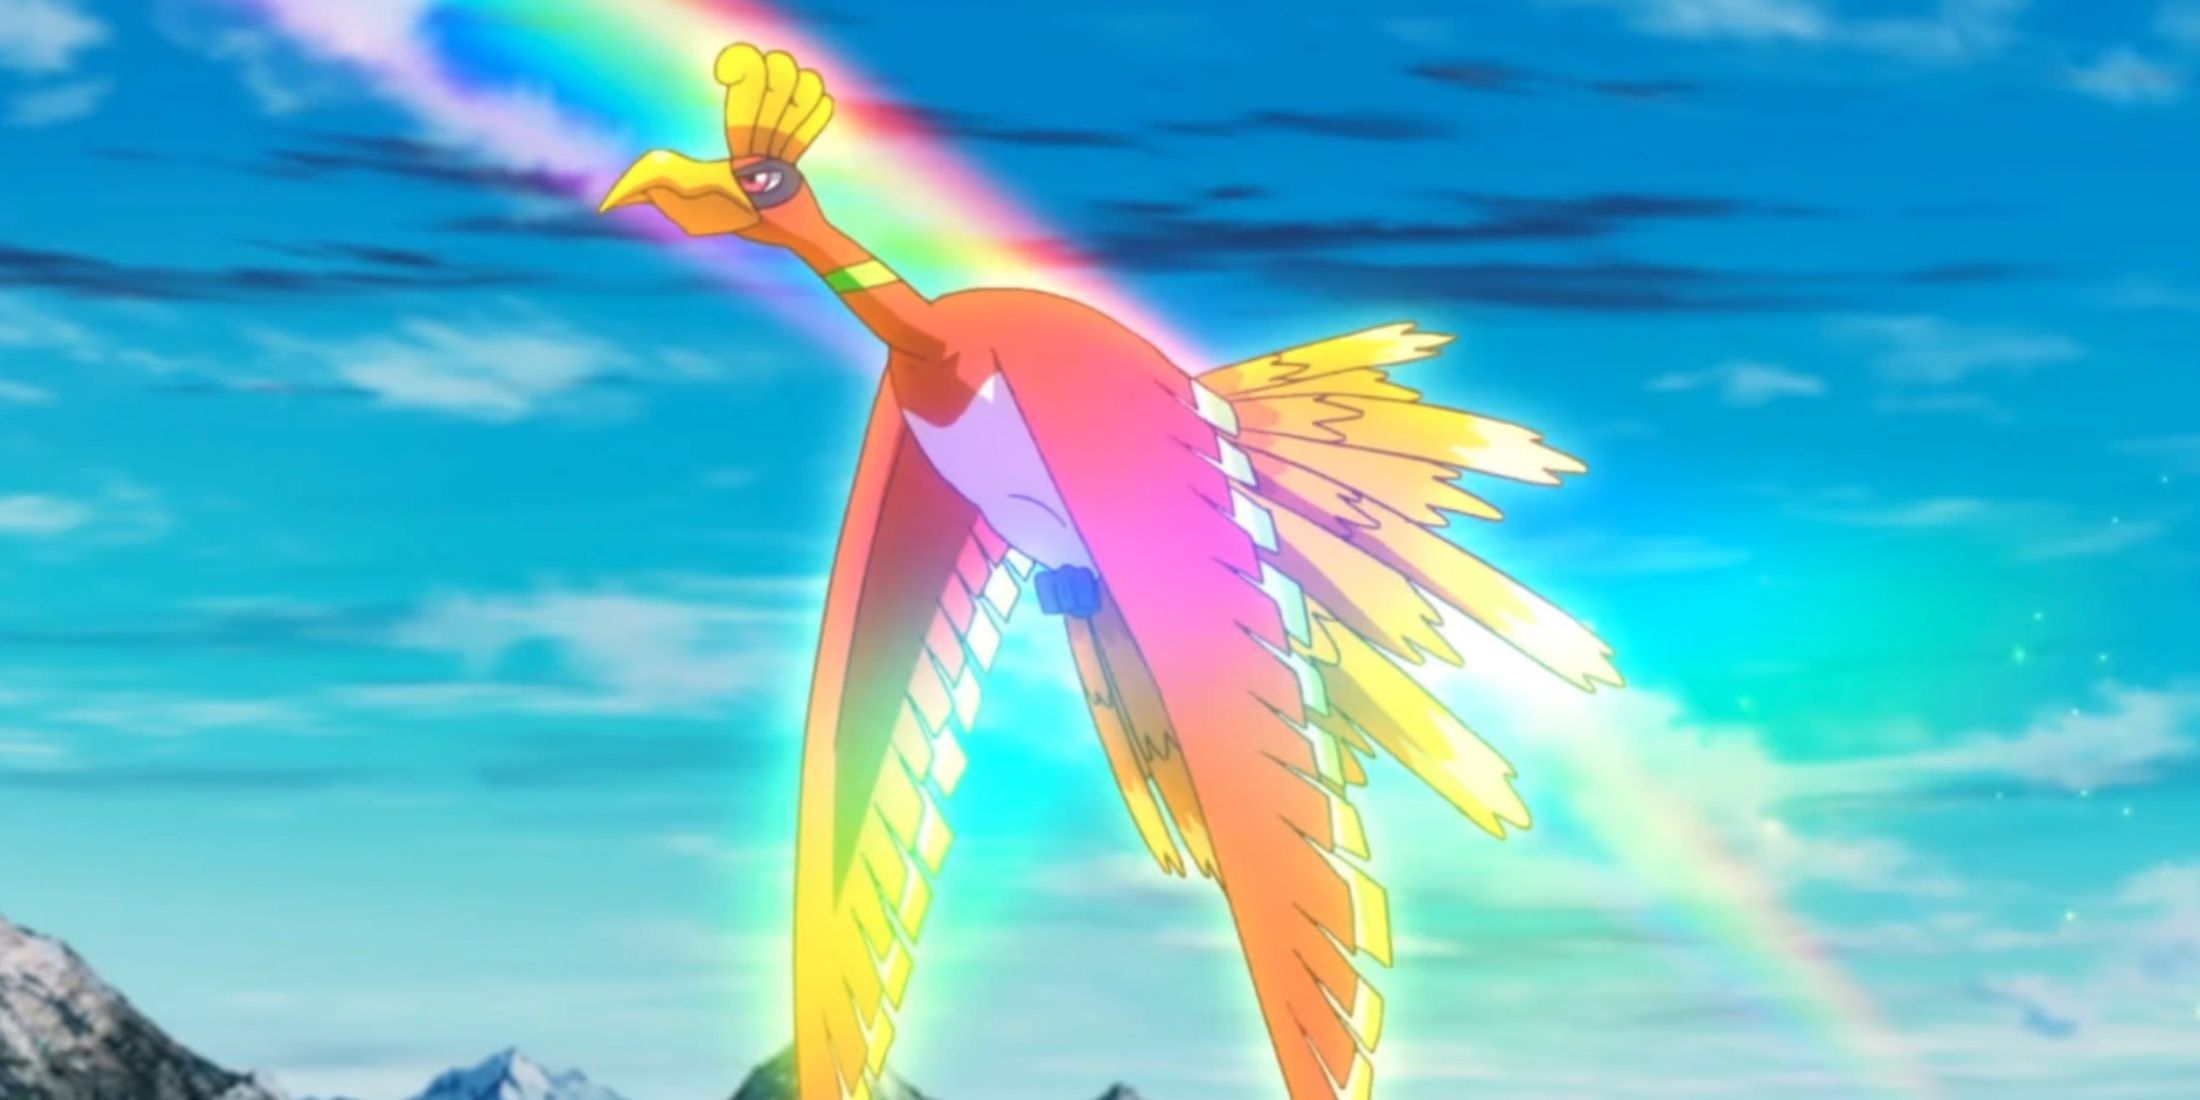 Ho-Oh flies across the sky in the Anime with a Rainbow in the background.